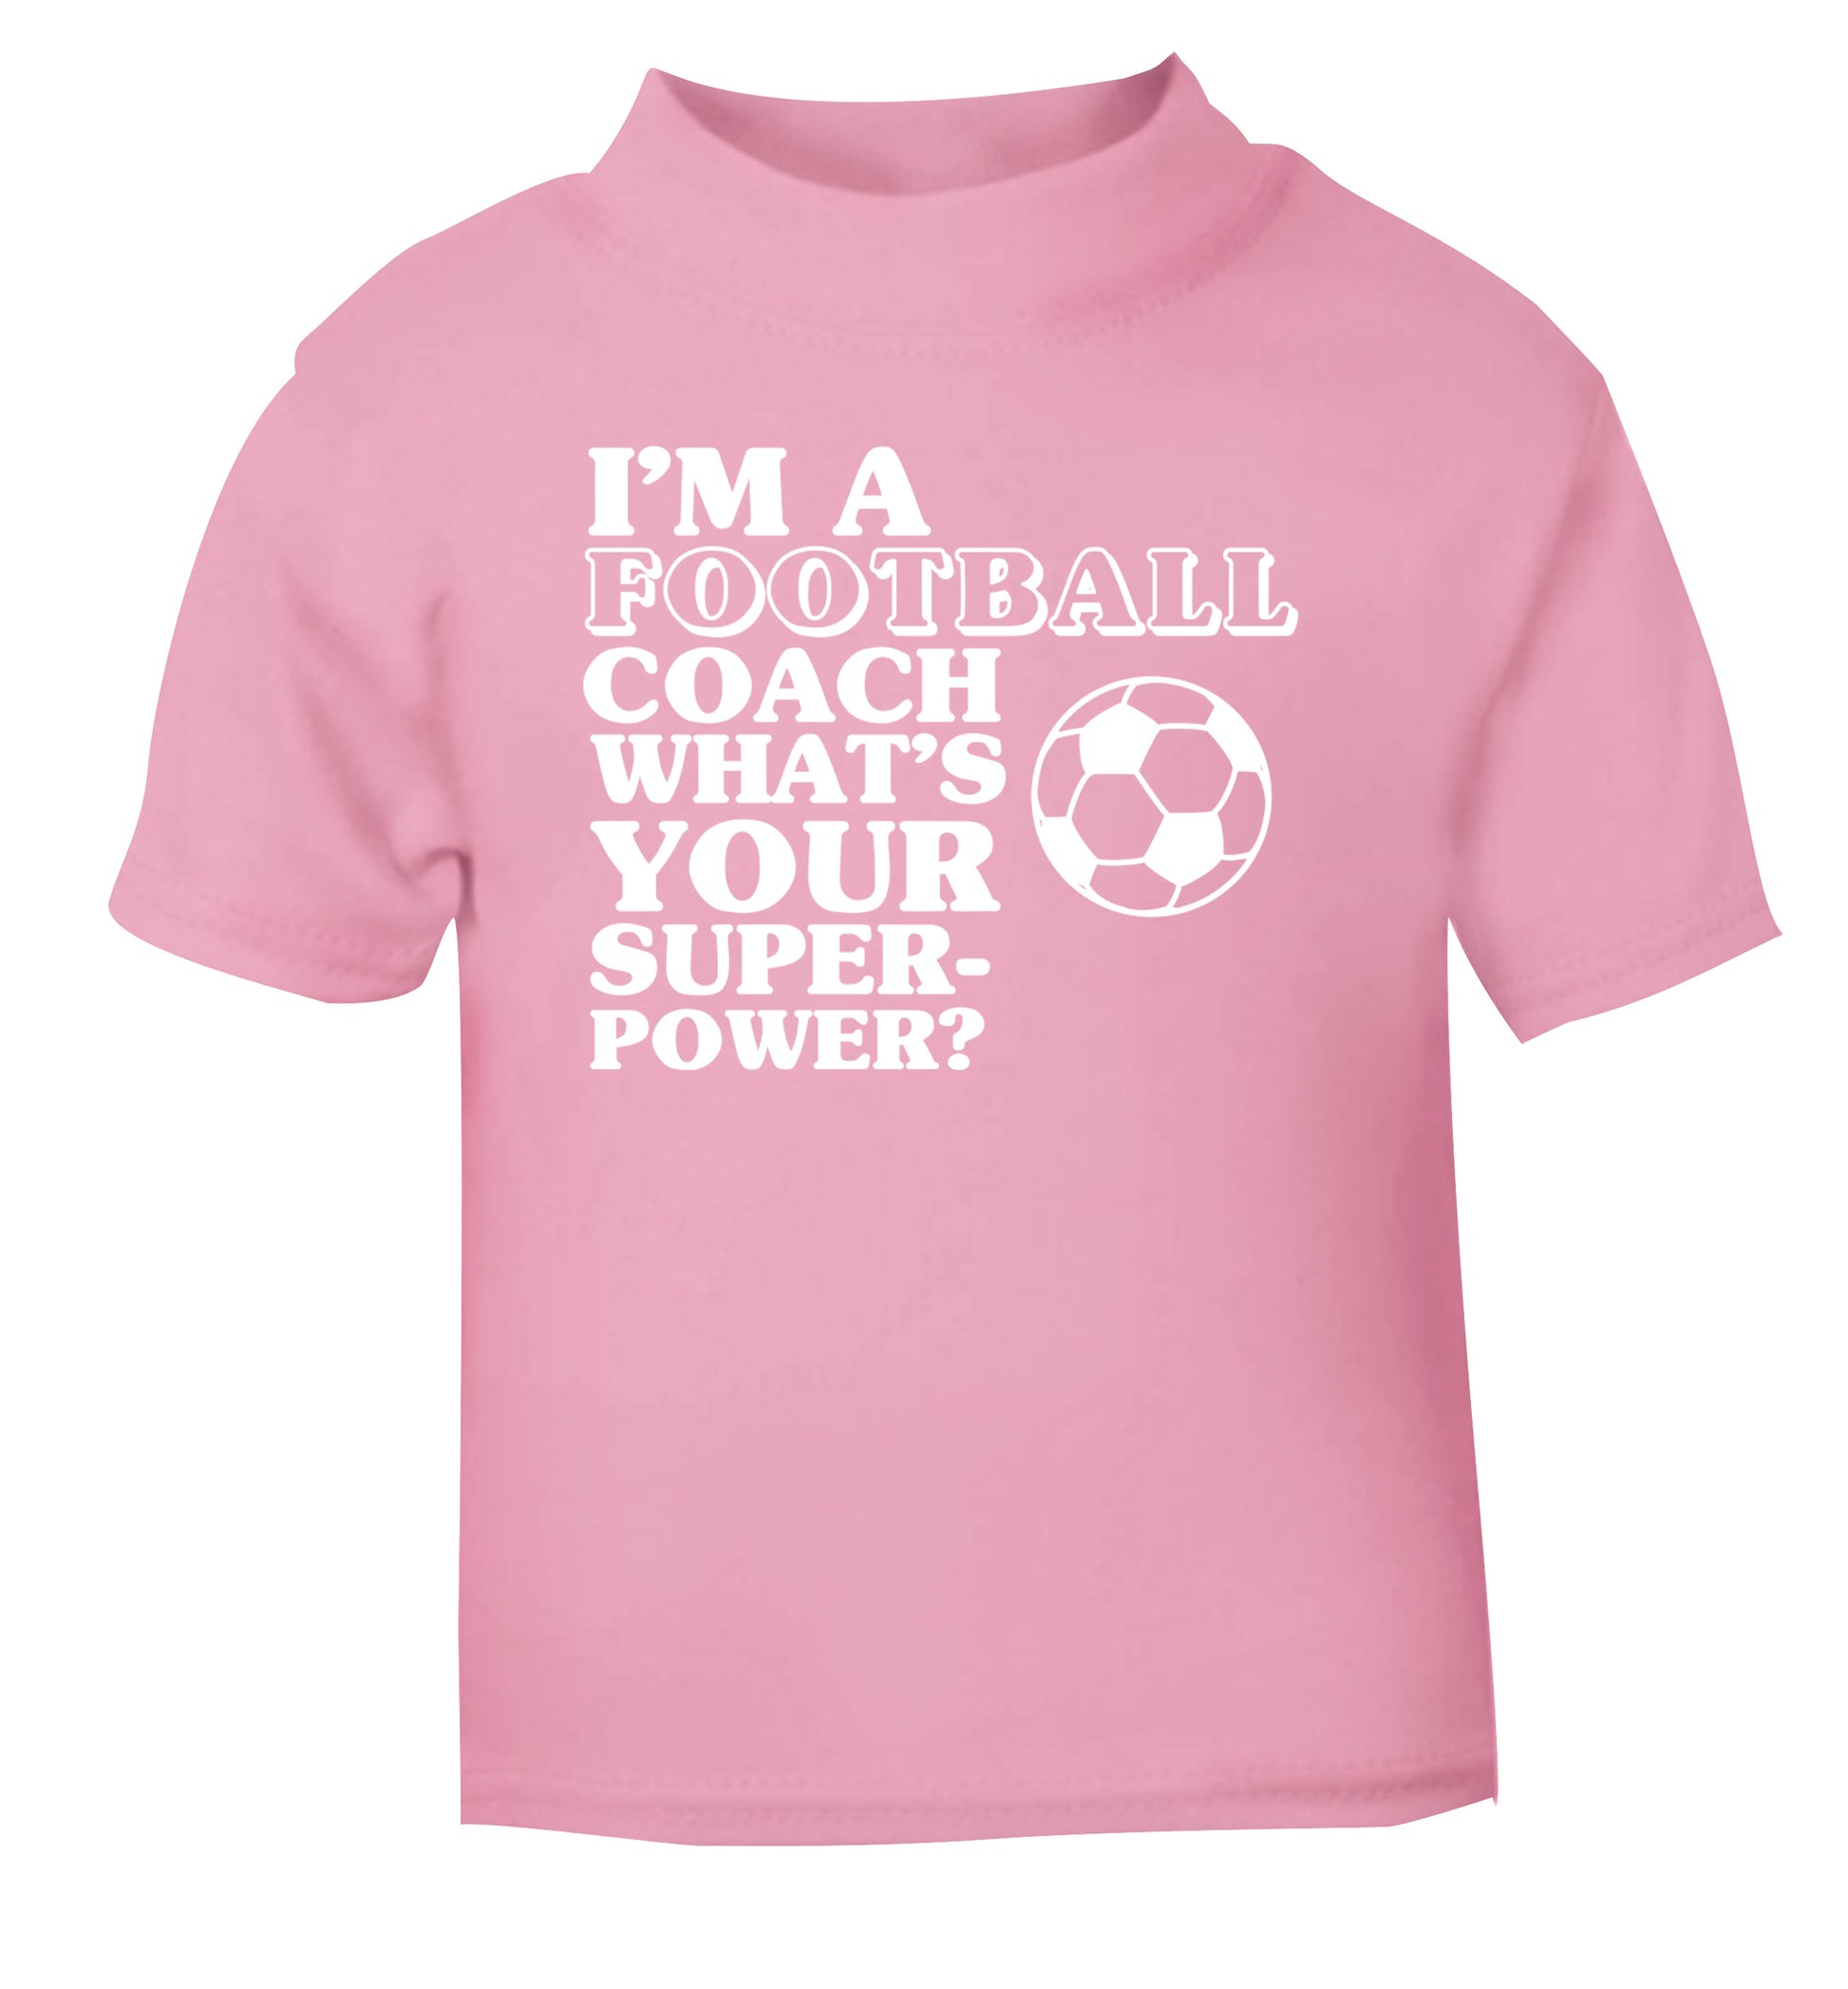 I'm a football coach what's your superpower? light pink Baby Toddler Tshirt 2 Years